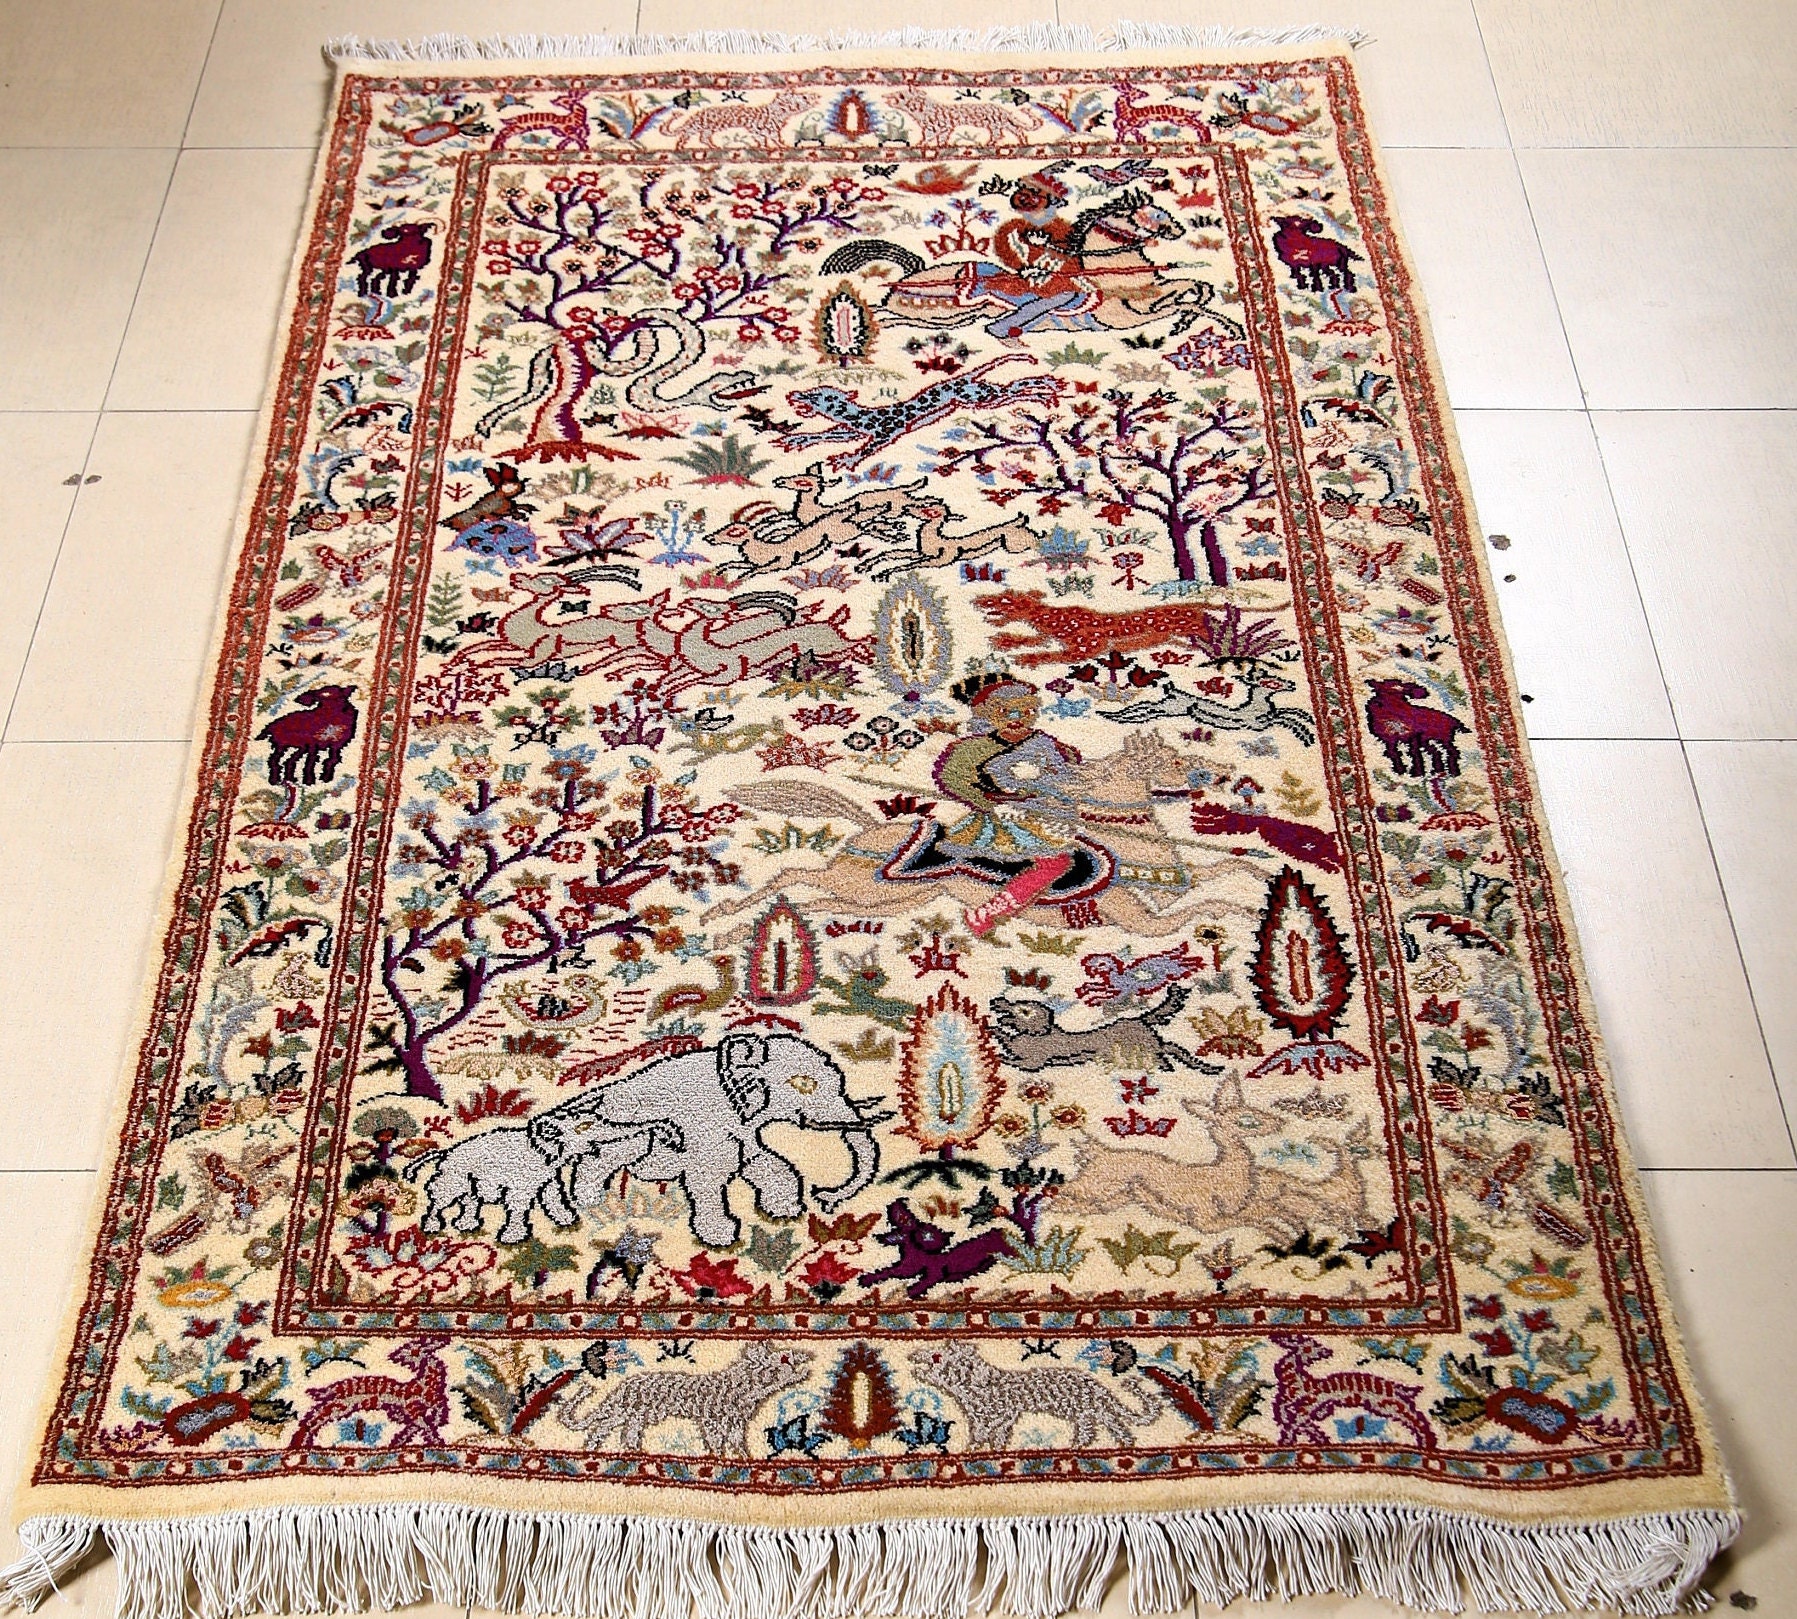 2' x 3' Handmade Persian Design made out of natural wool natural dyes throw rug 